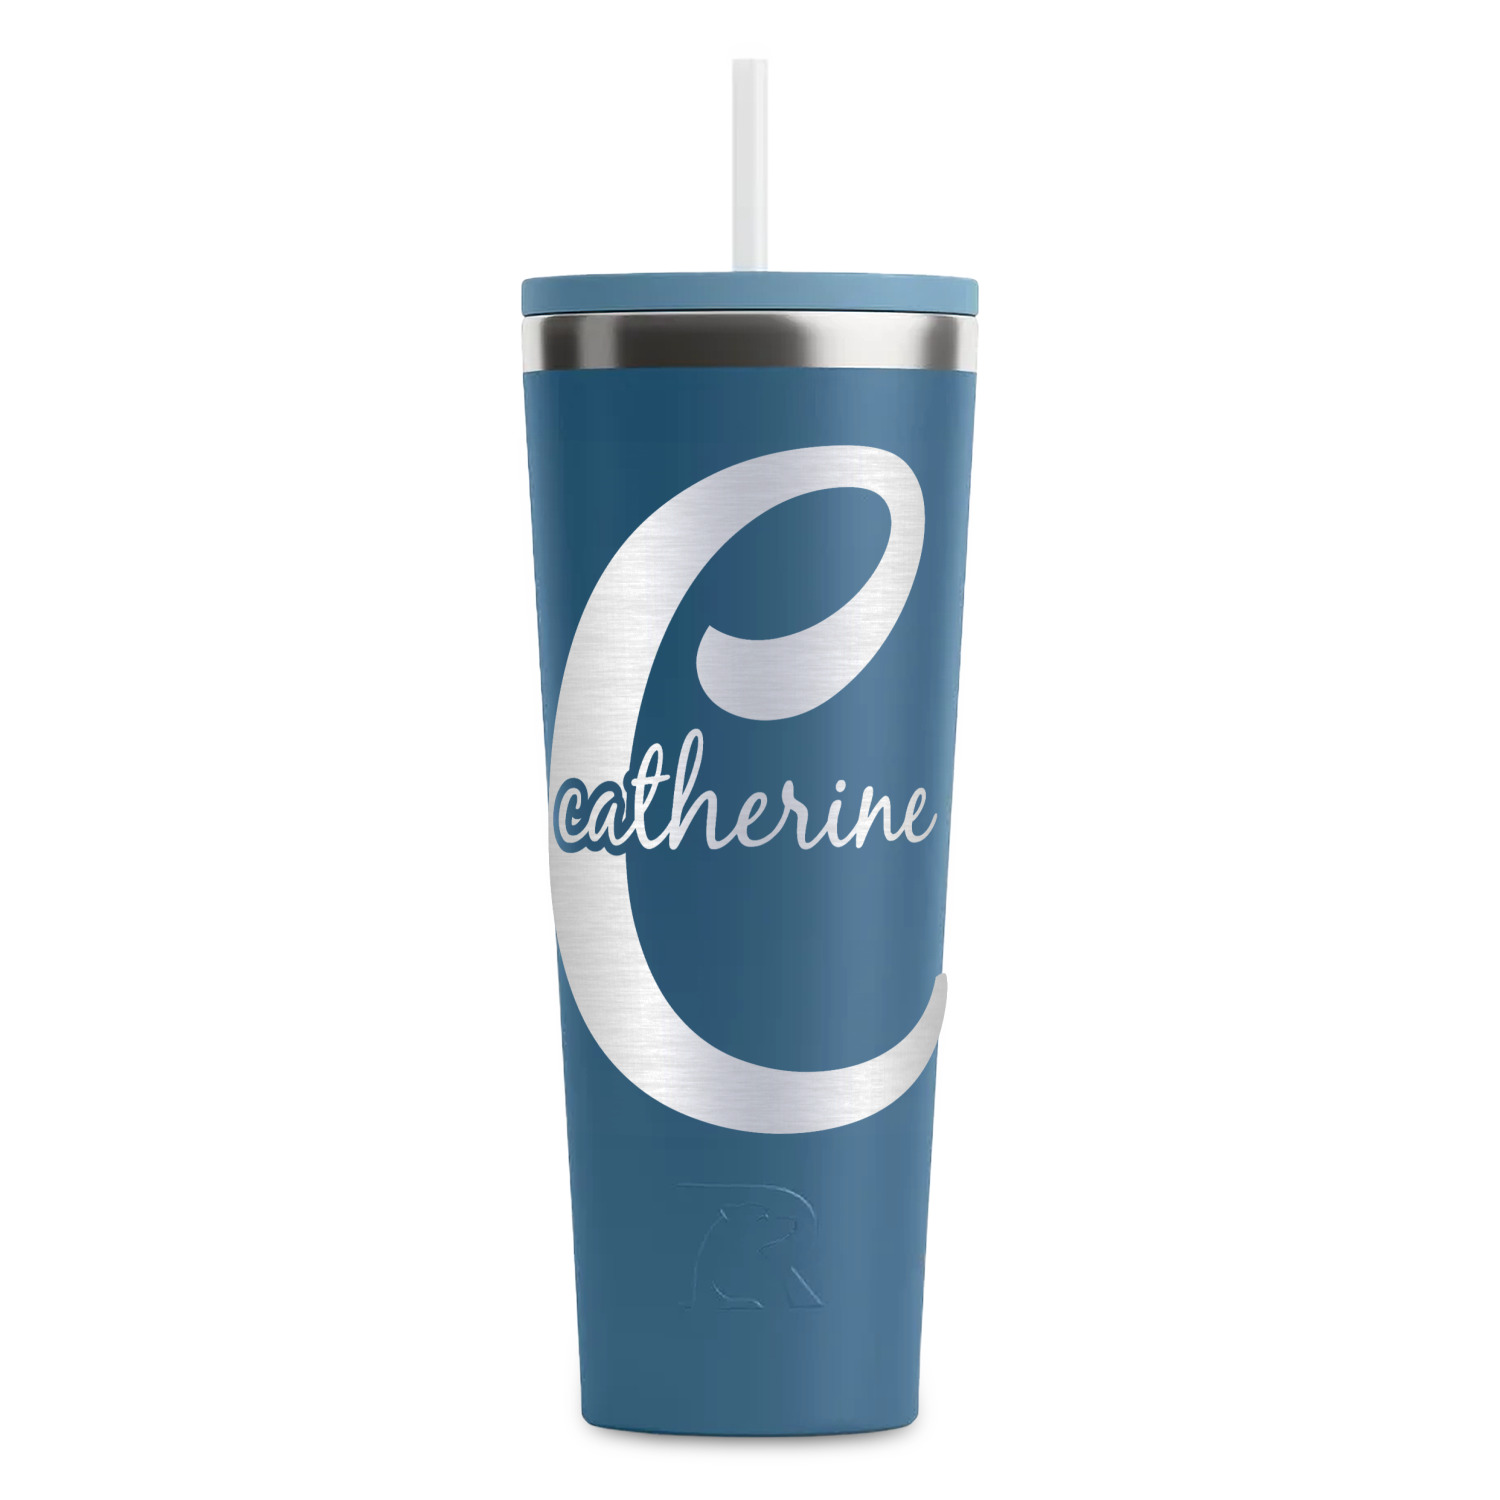 https://www.youcustomizeit.com/common/MAKE/837763/Name-Initial-Girly-Steel-Blue-RTIC-Everyday-Tumbler-28-oz-Front.jpg?lm=1698259131